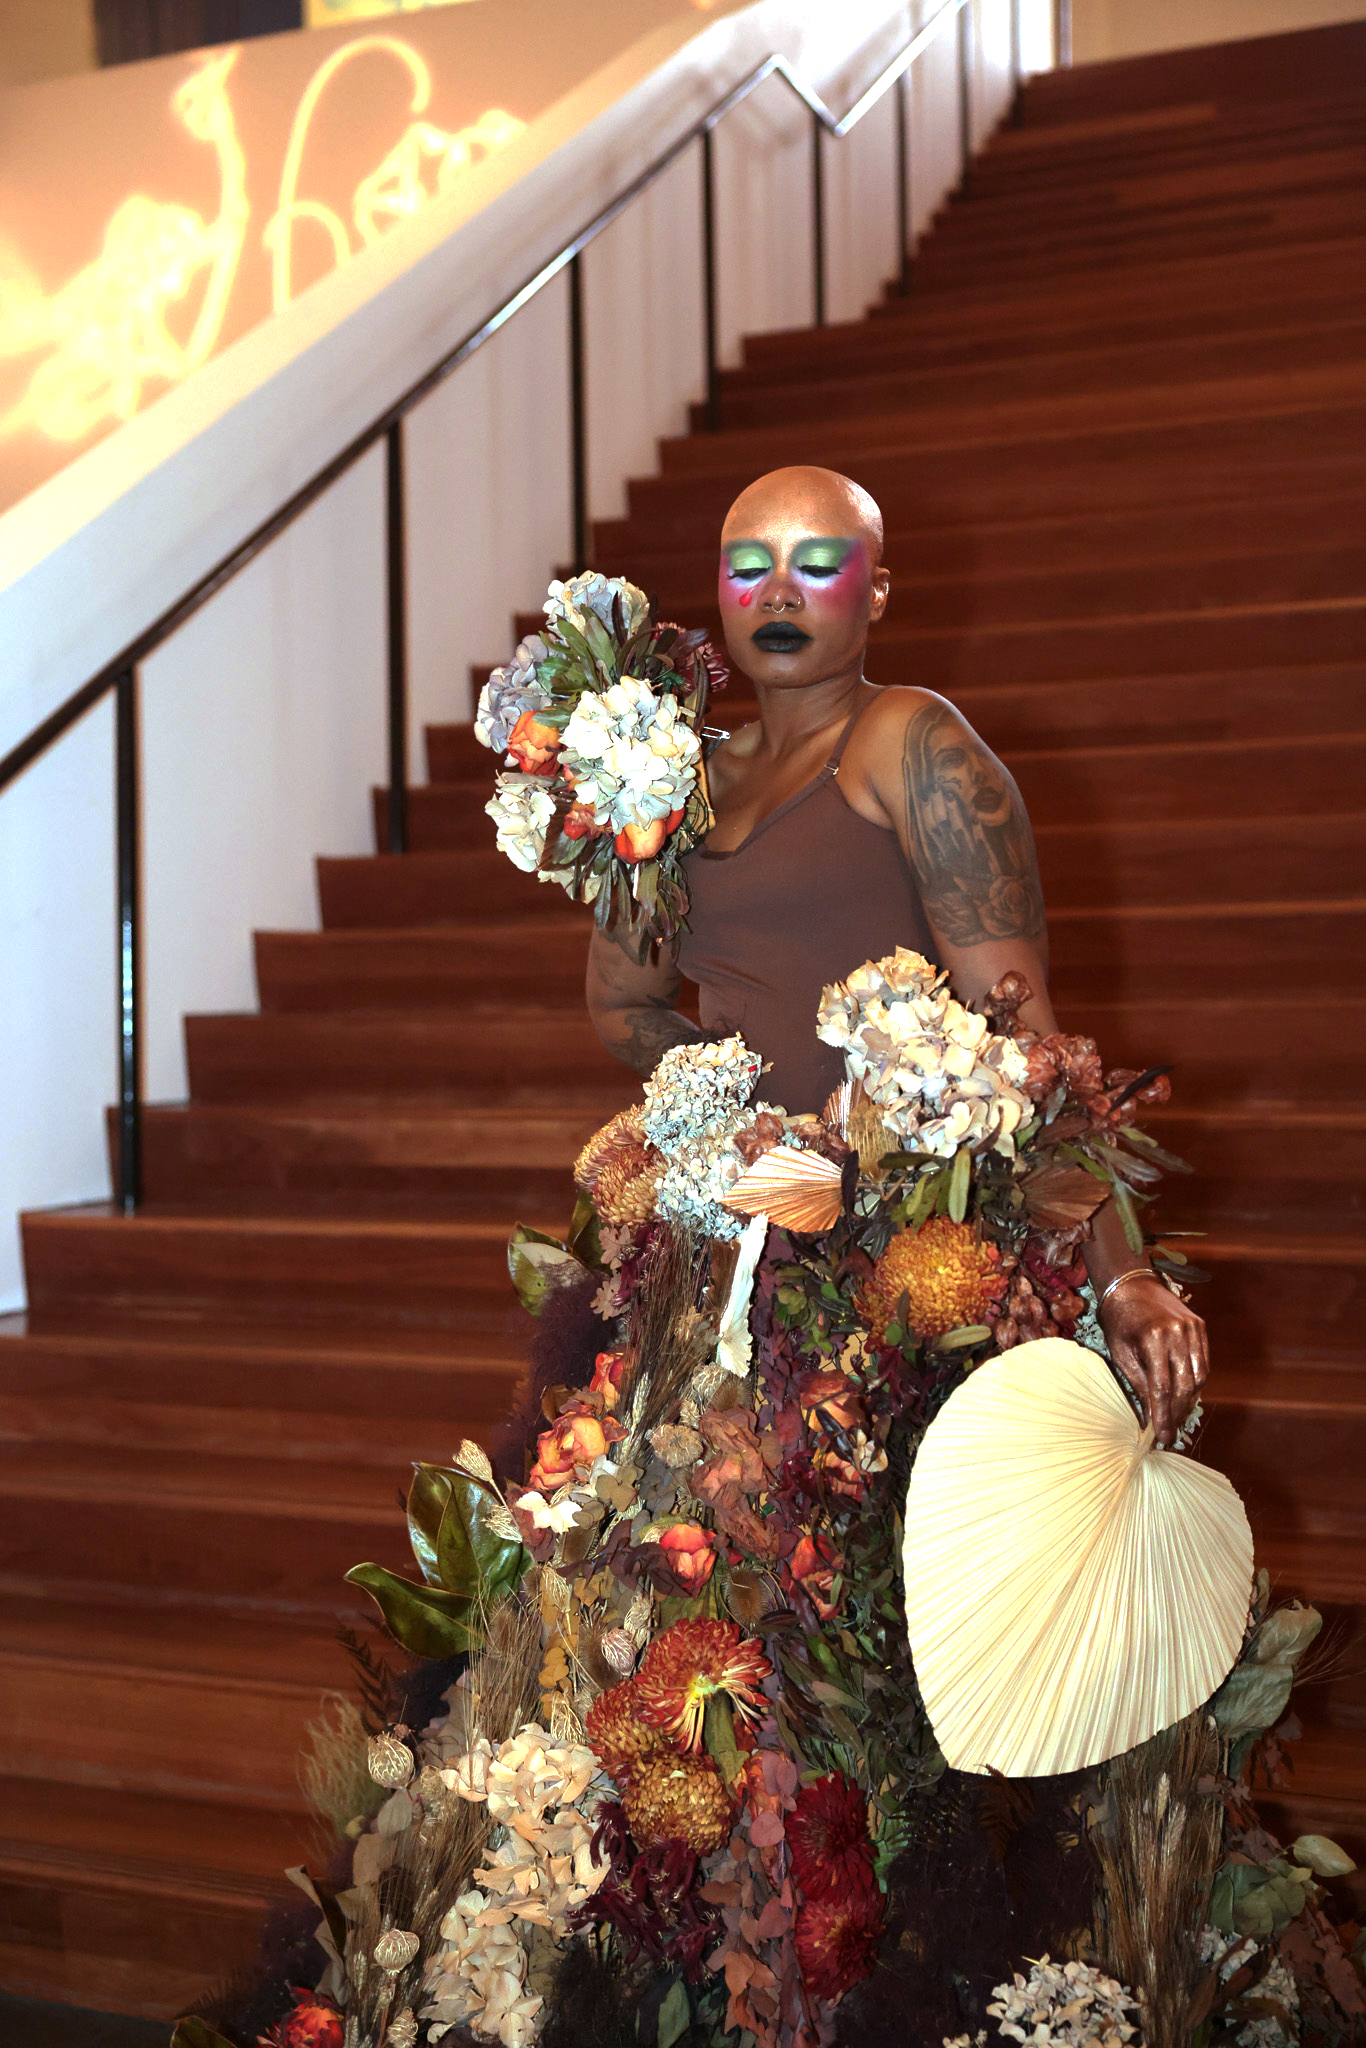 A person with bold, colorful makeup stands on a staircase, wearing a dress adorned with various dried flowers and holding a bouquet and a large leaf fan. They have tattoos.